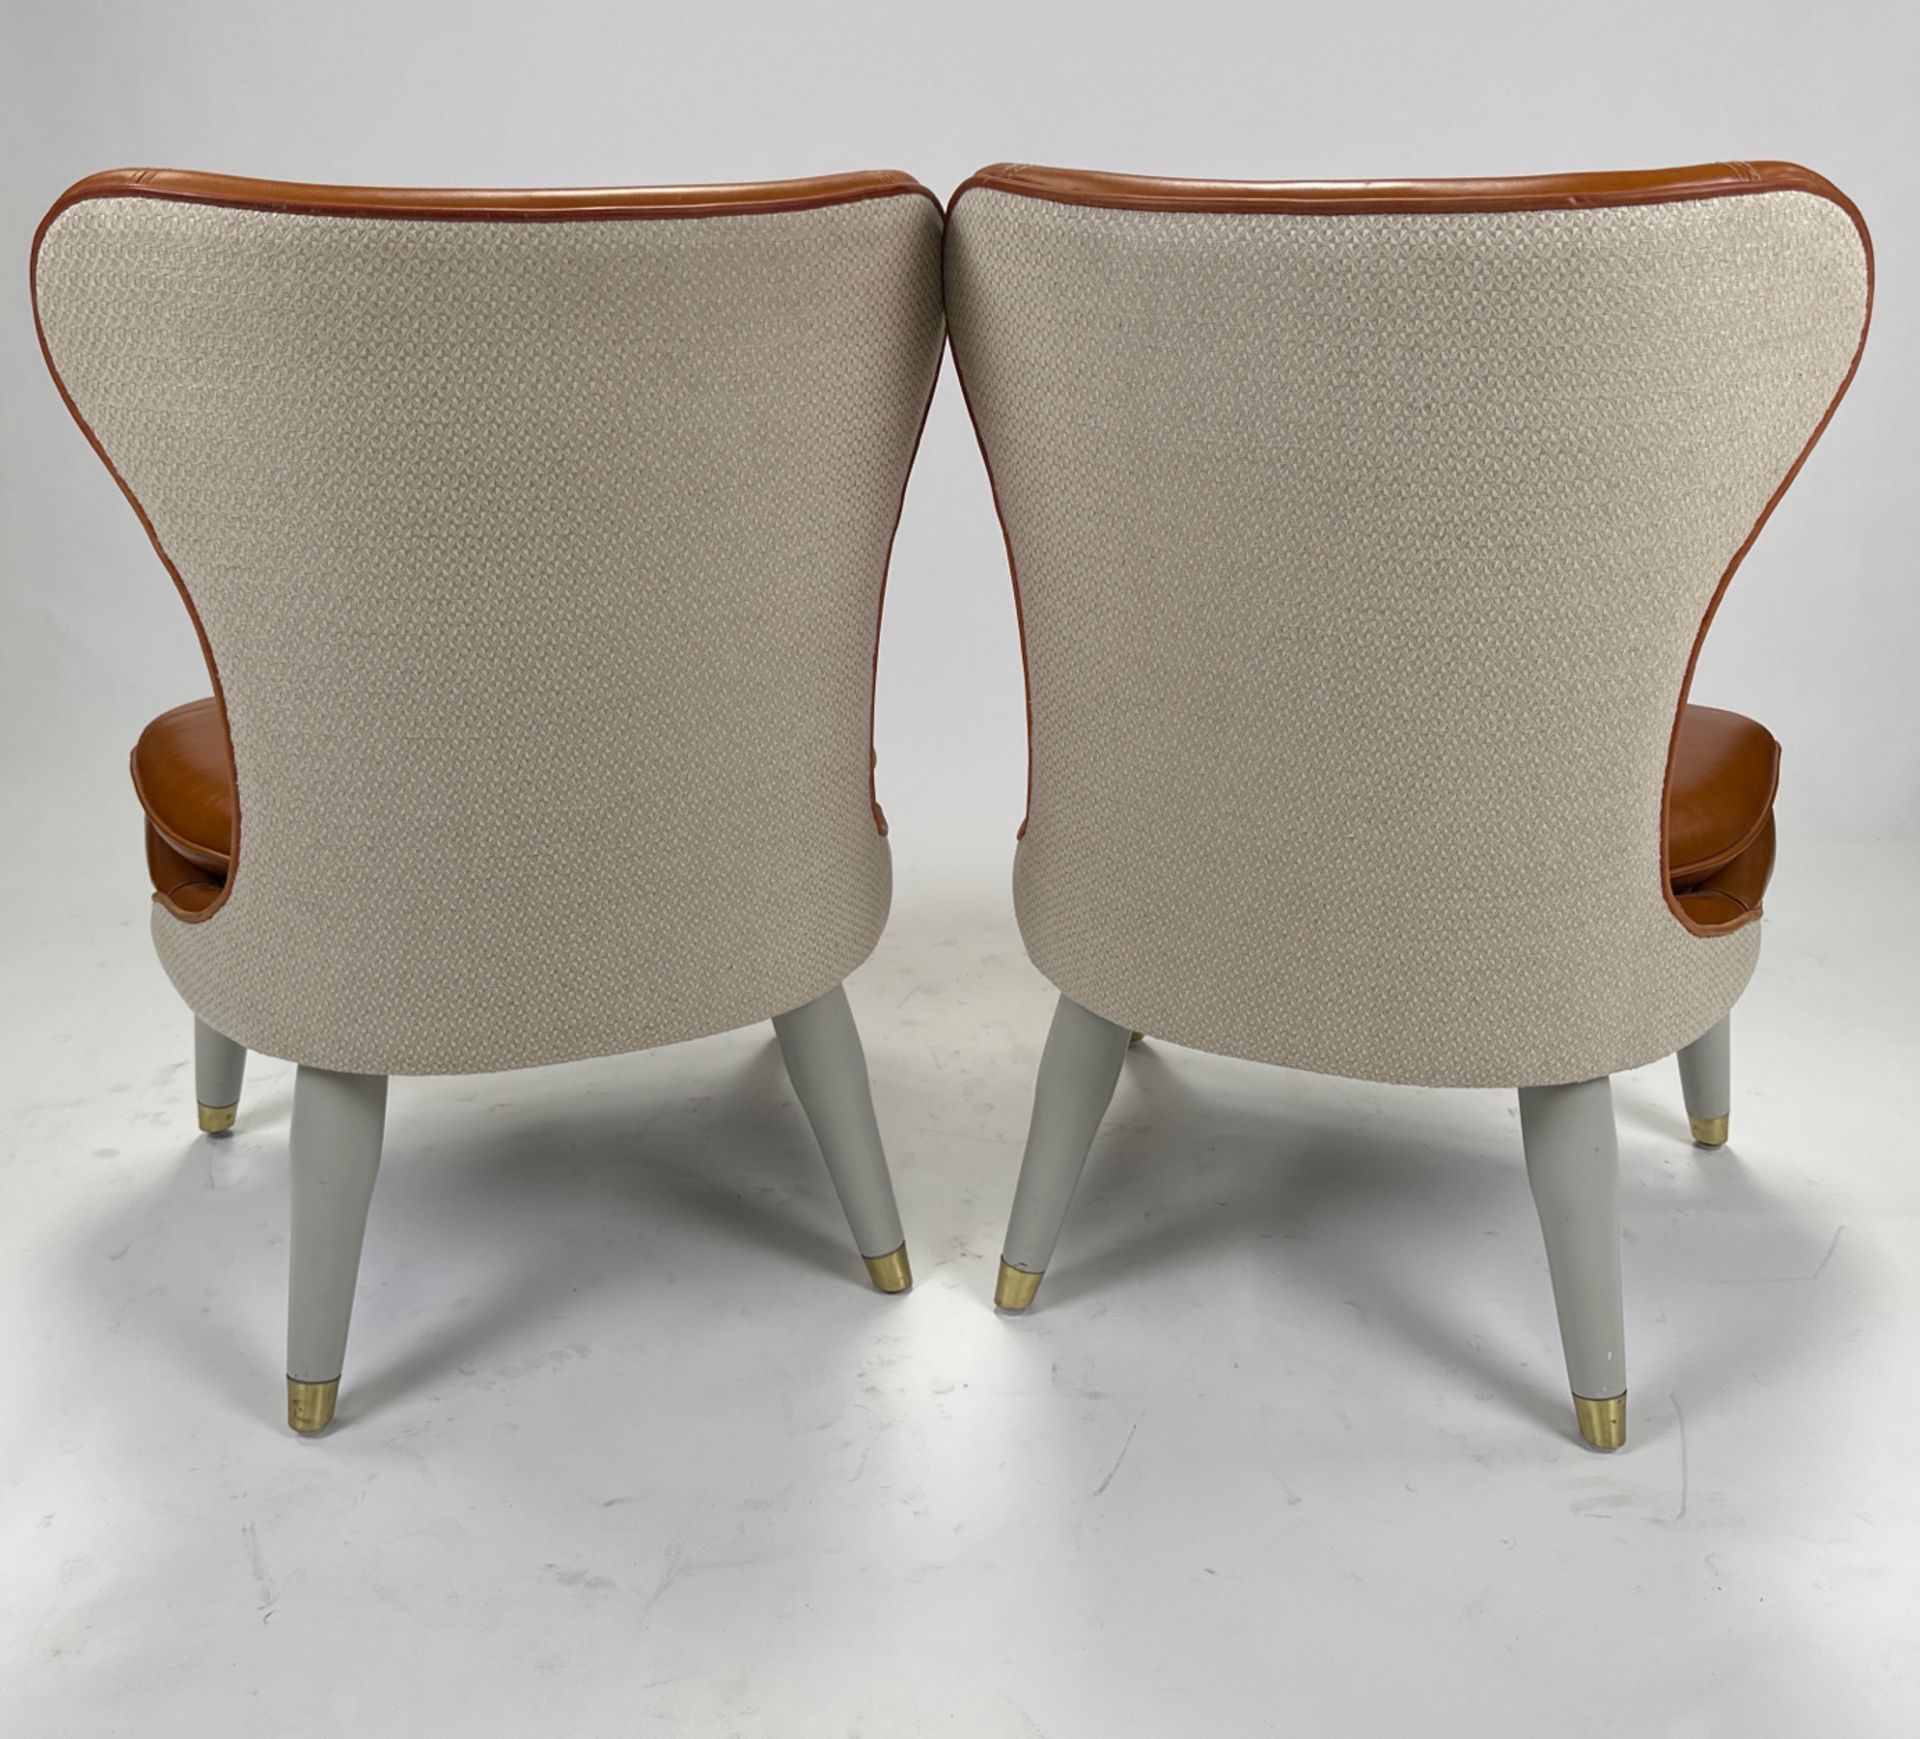 Pair of Ben Whistler Chairs Commissioned by Robert Angell Designed for The Berkeley - Image 3 of 4